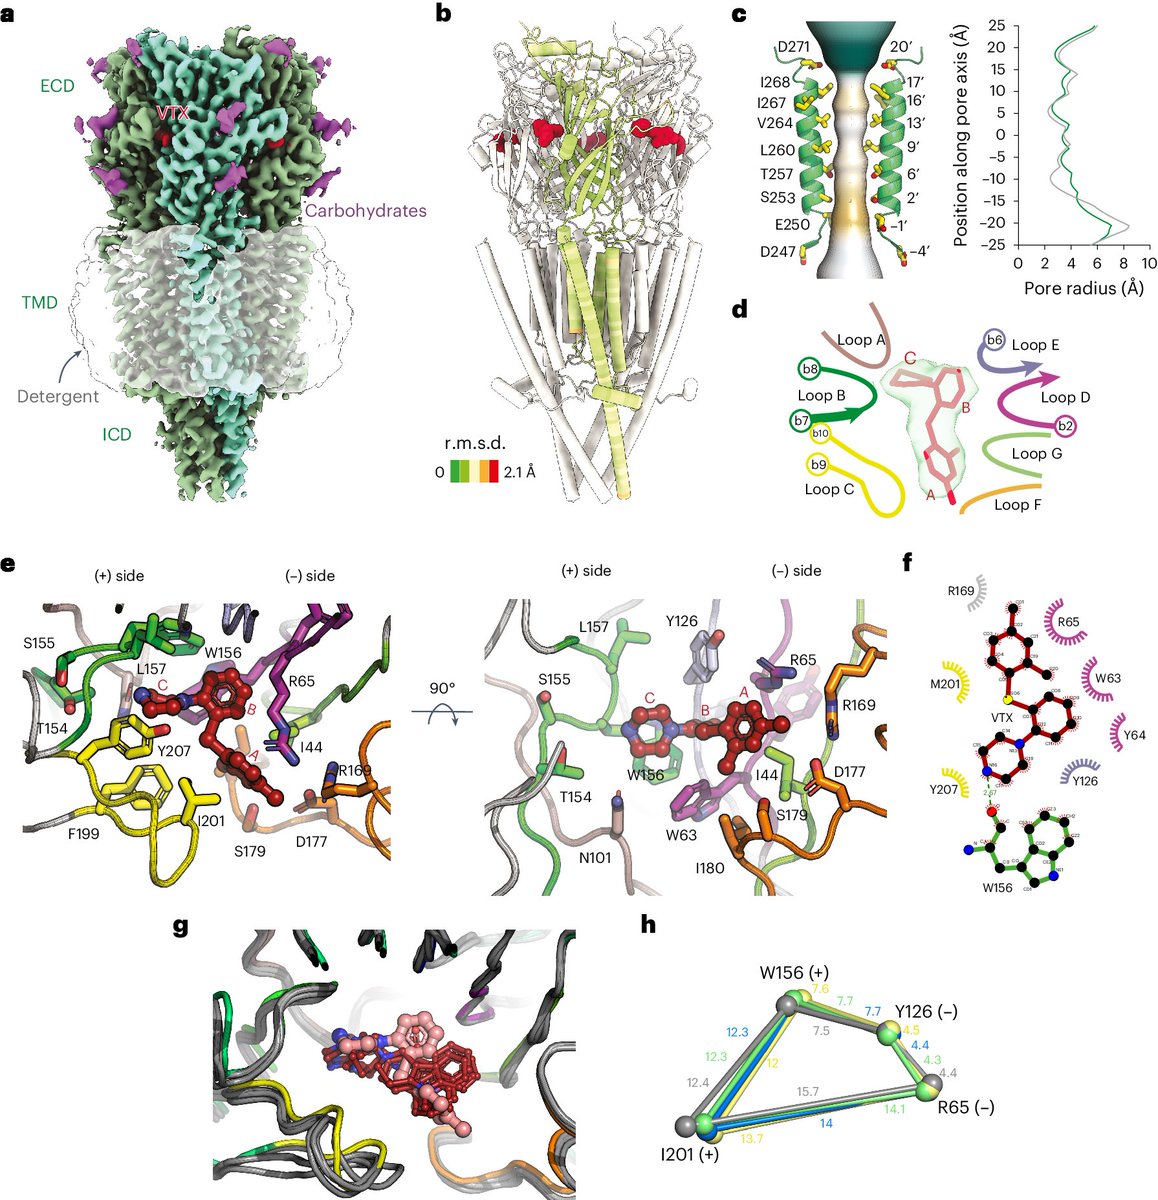 Structural determinants for activity of the antidepressant vortioxetine at human and rodent 5-HT3 receptors | Nat Struct Mol Biol

doi.org/10.1038/s41594…